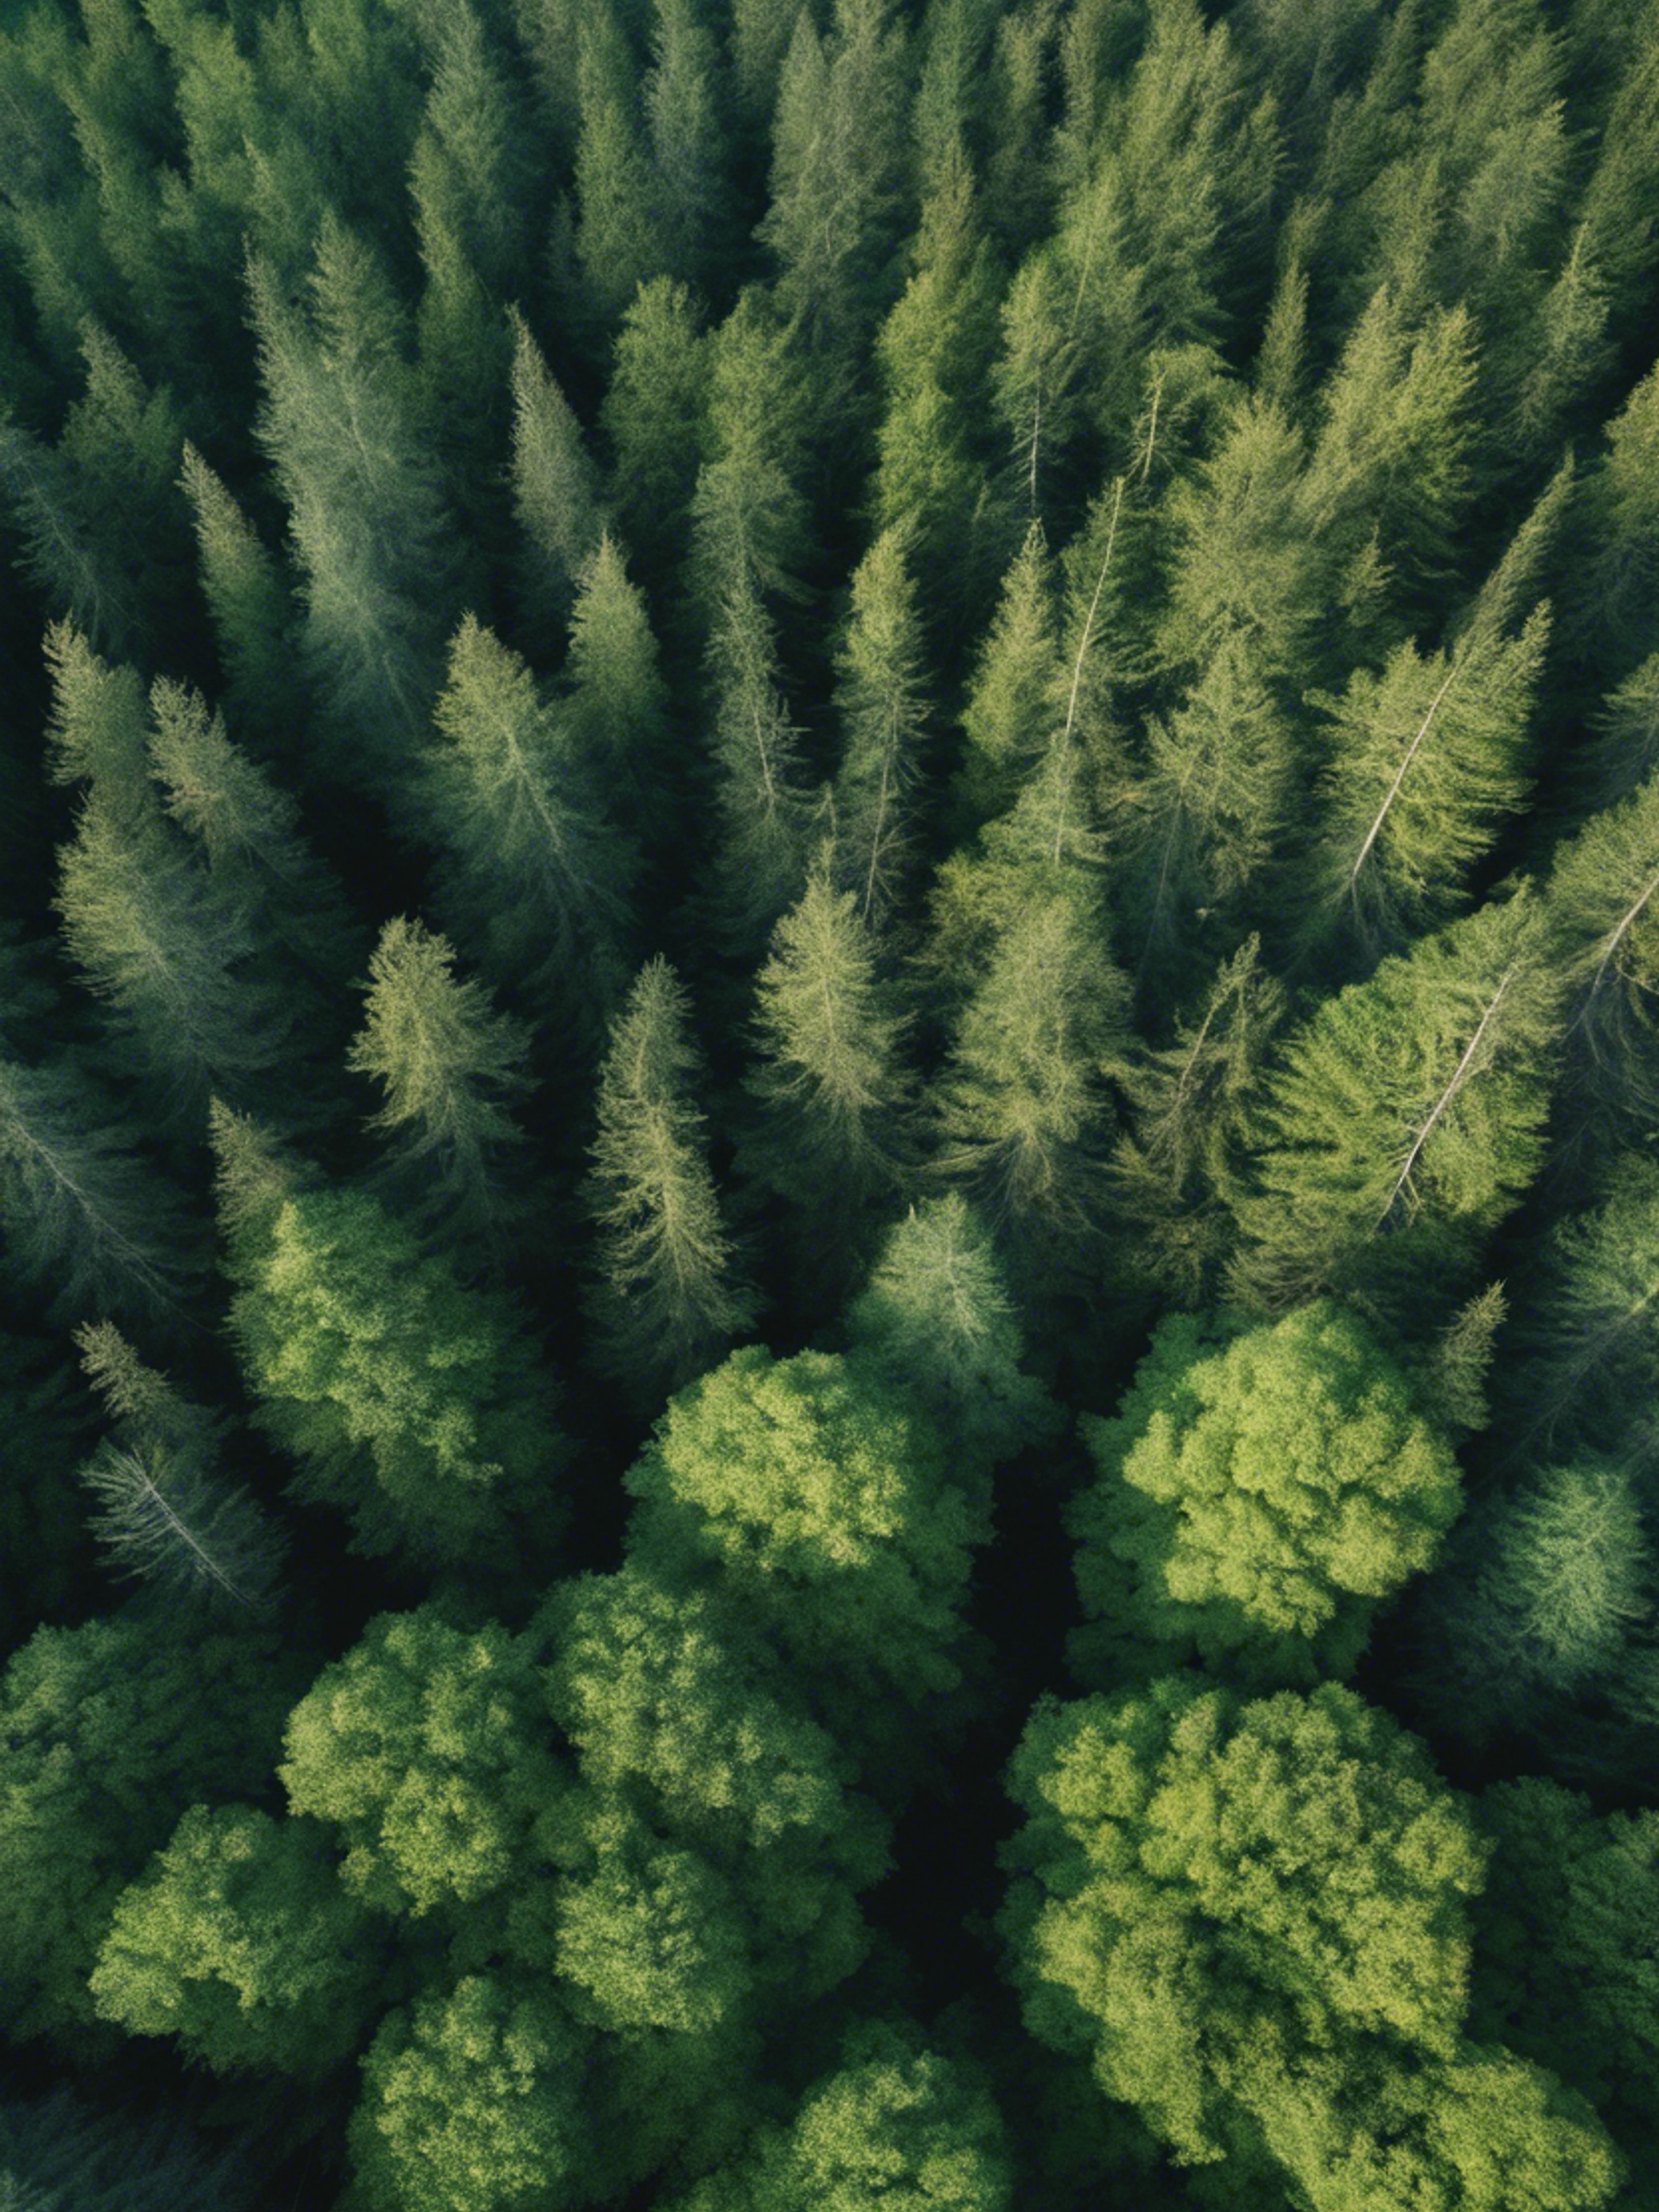 An aerial view of a summer forest, showing different shades of cool green.壁紙[0f690078d26f4d7895b4]